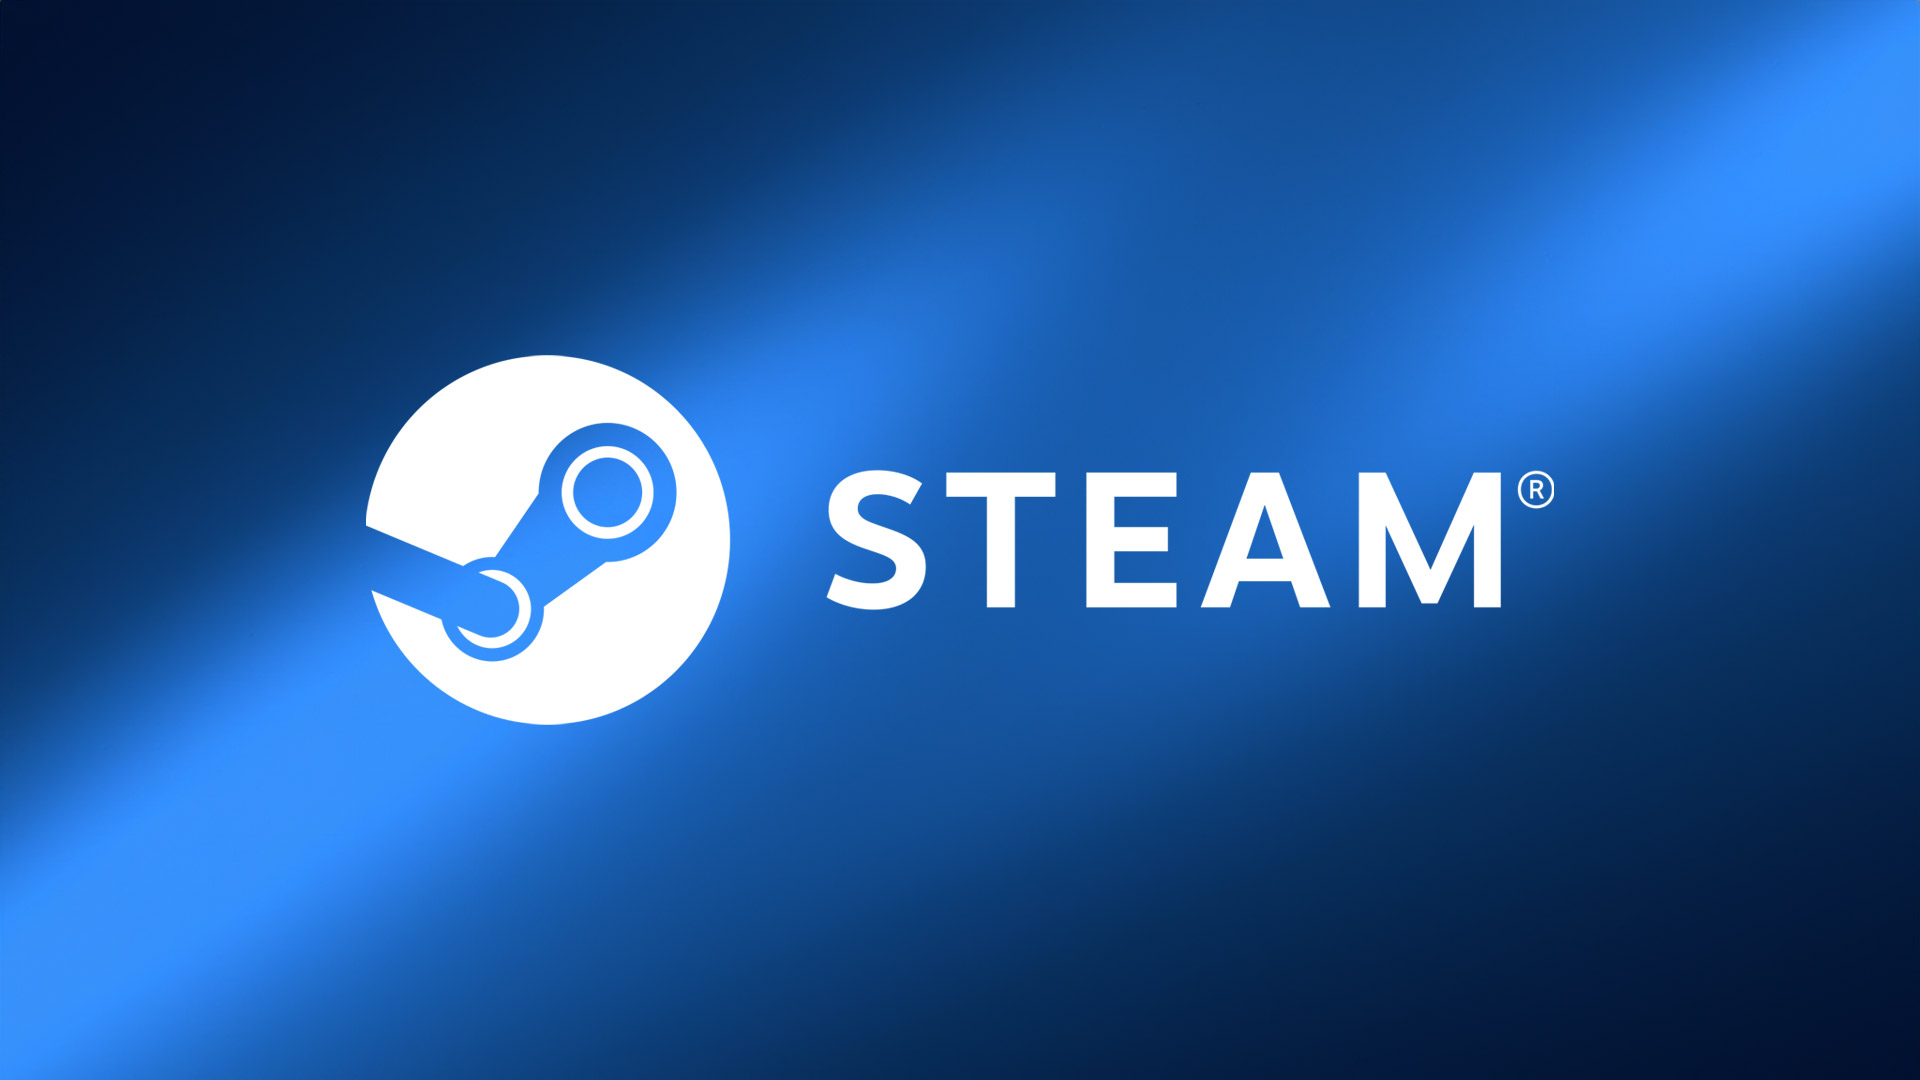 Steam Dropping Support for OS X 10.10 Yosemite and Earlier - MacRumors